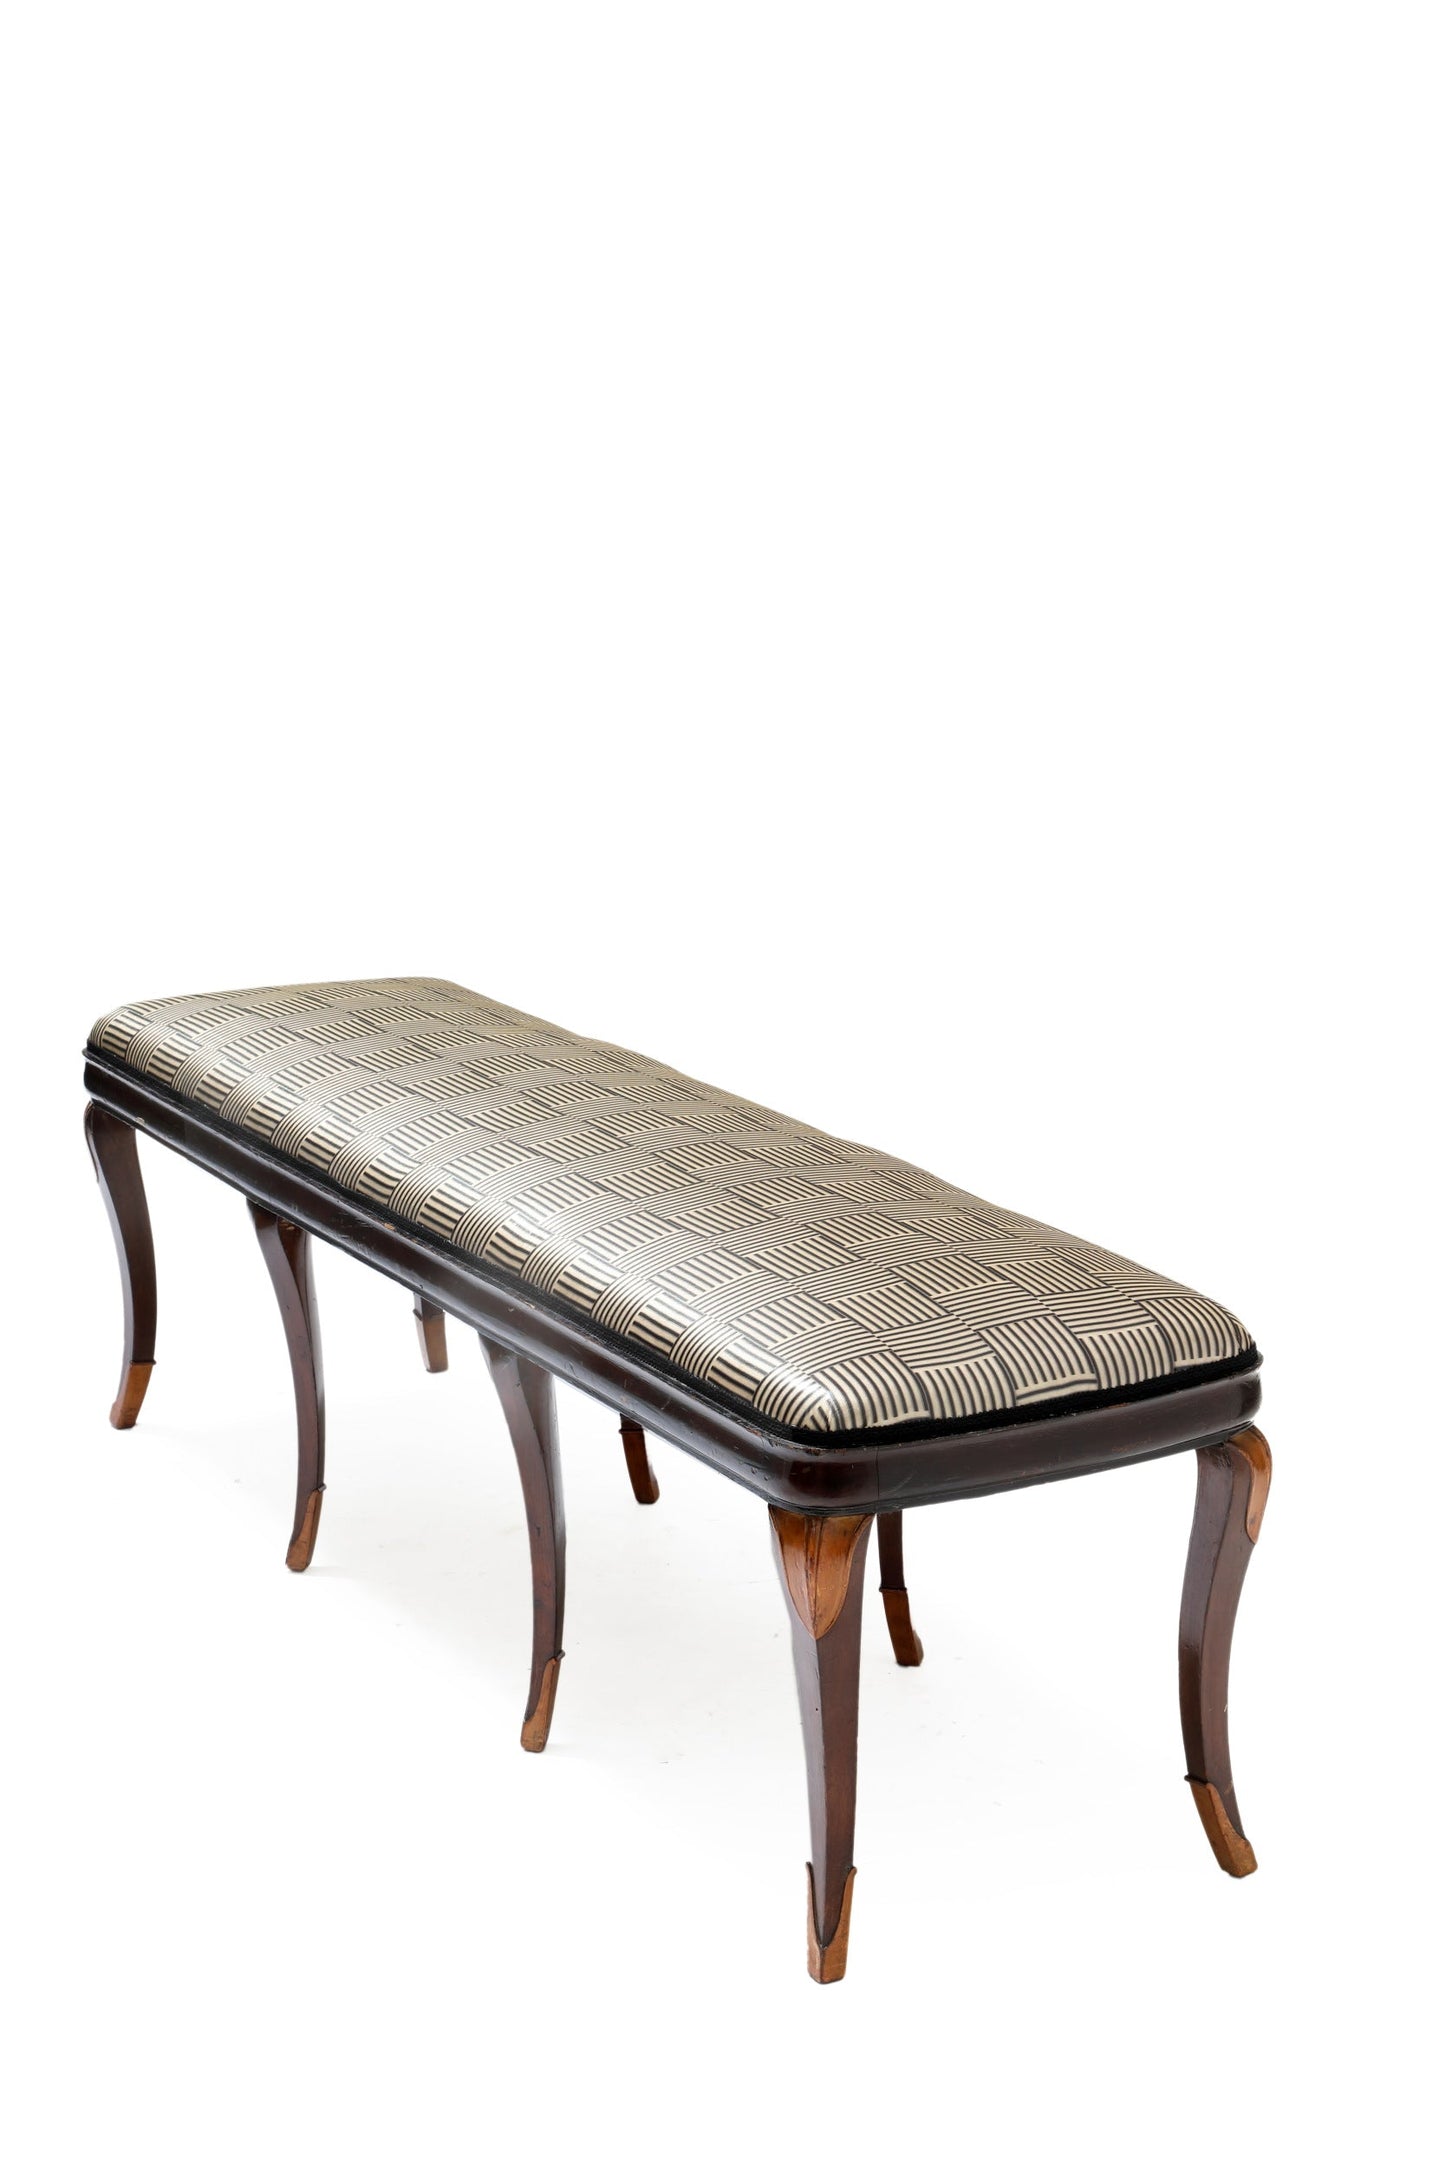 Paolo Buffa bench from the 50s reinterpreted triplef